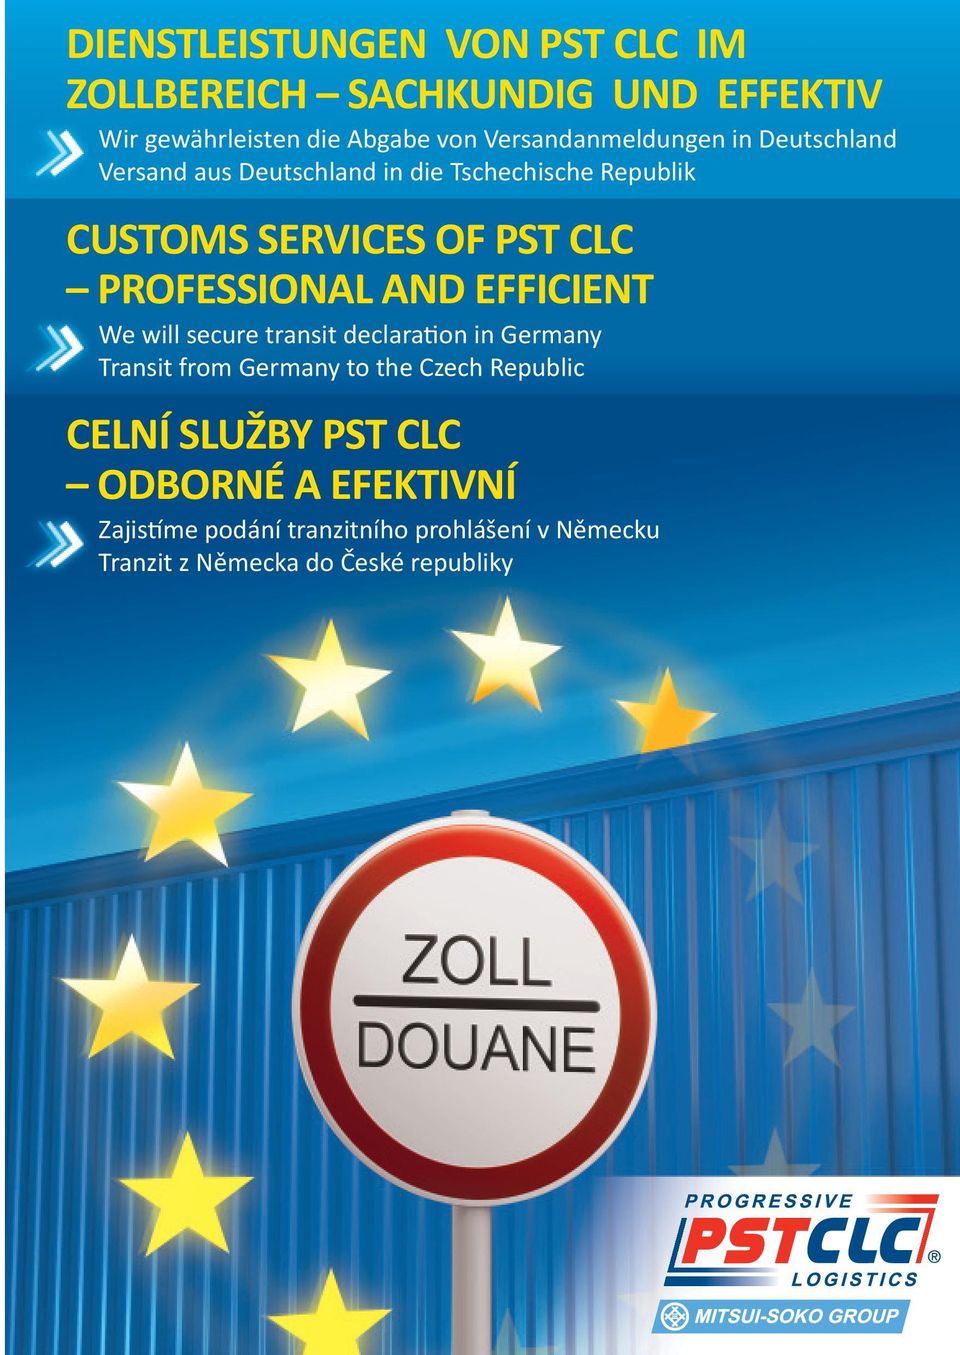 PROFESSIONAL AND EFFICIENT We will secure transit declara on in Germany Transit from Germany to the Czech Republic